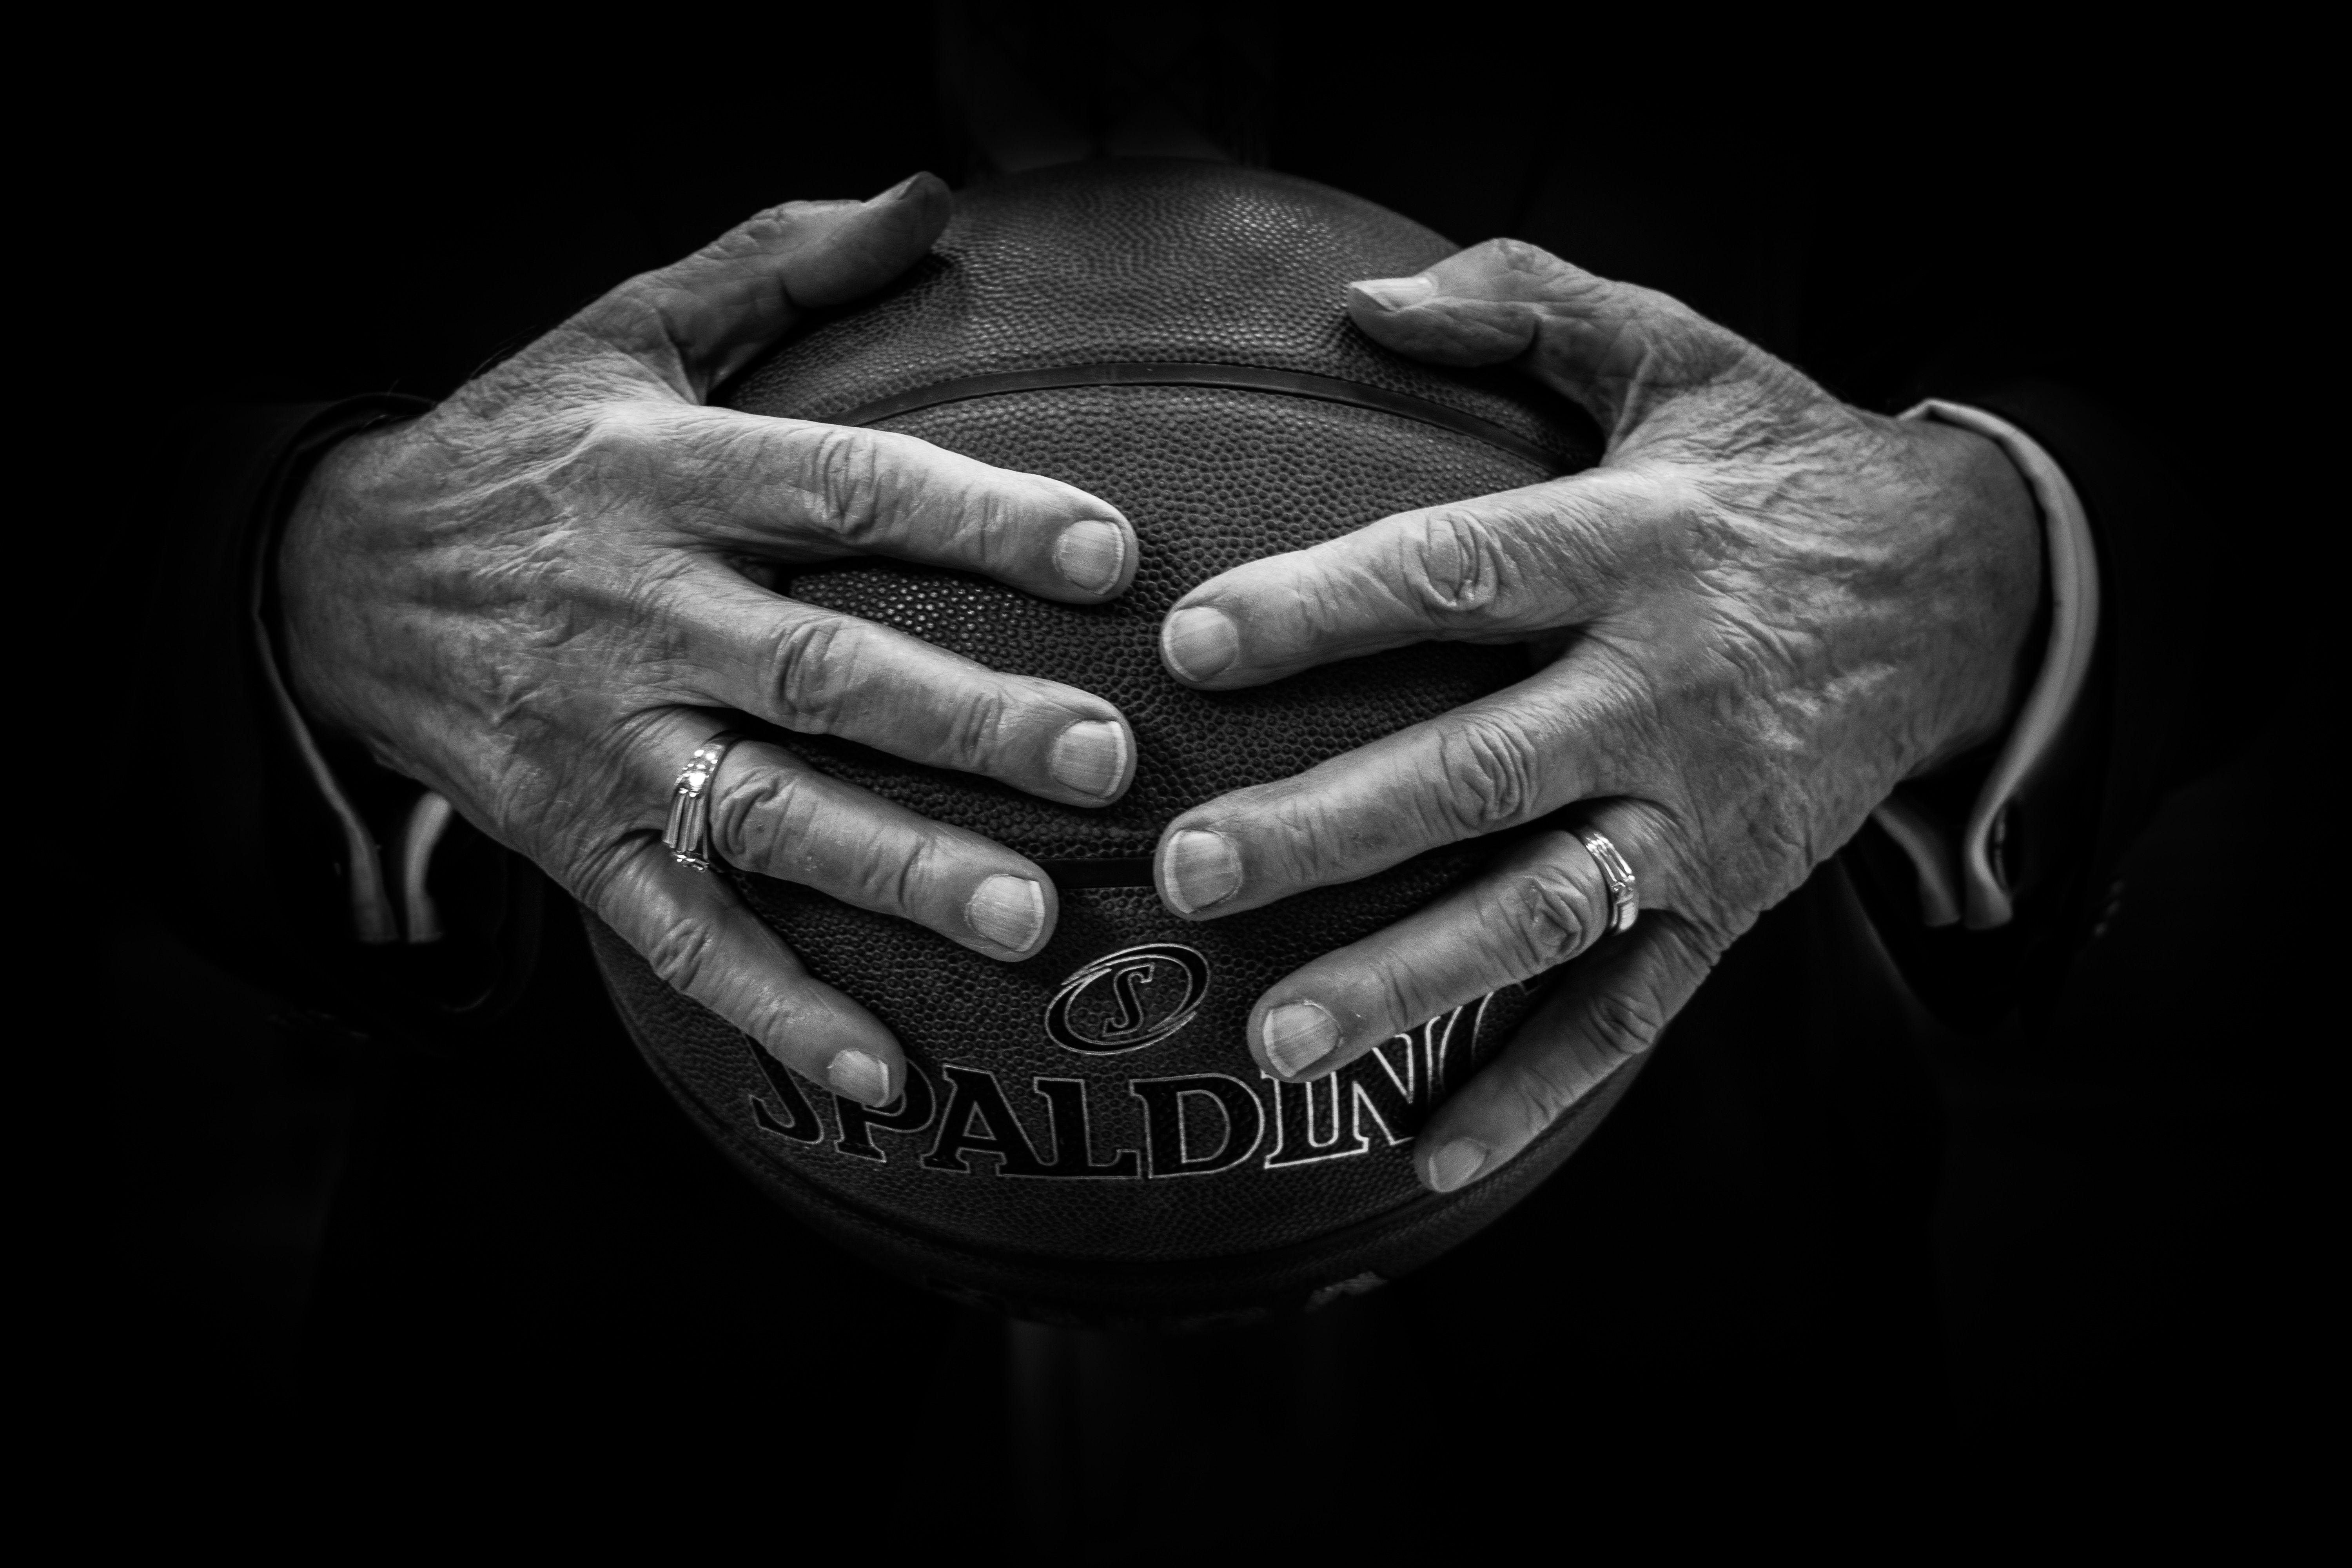 2 Hands -On Ball Logo - grey scale photo of two hands holding a spalding basketball free ...